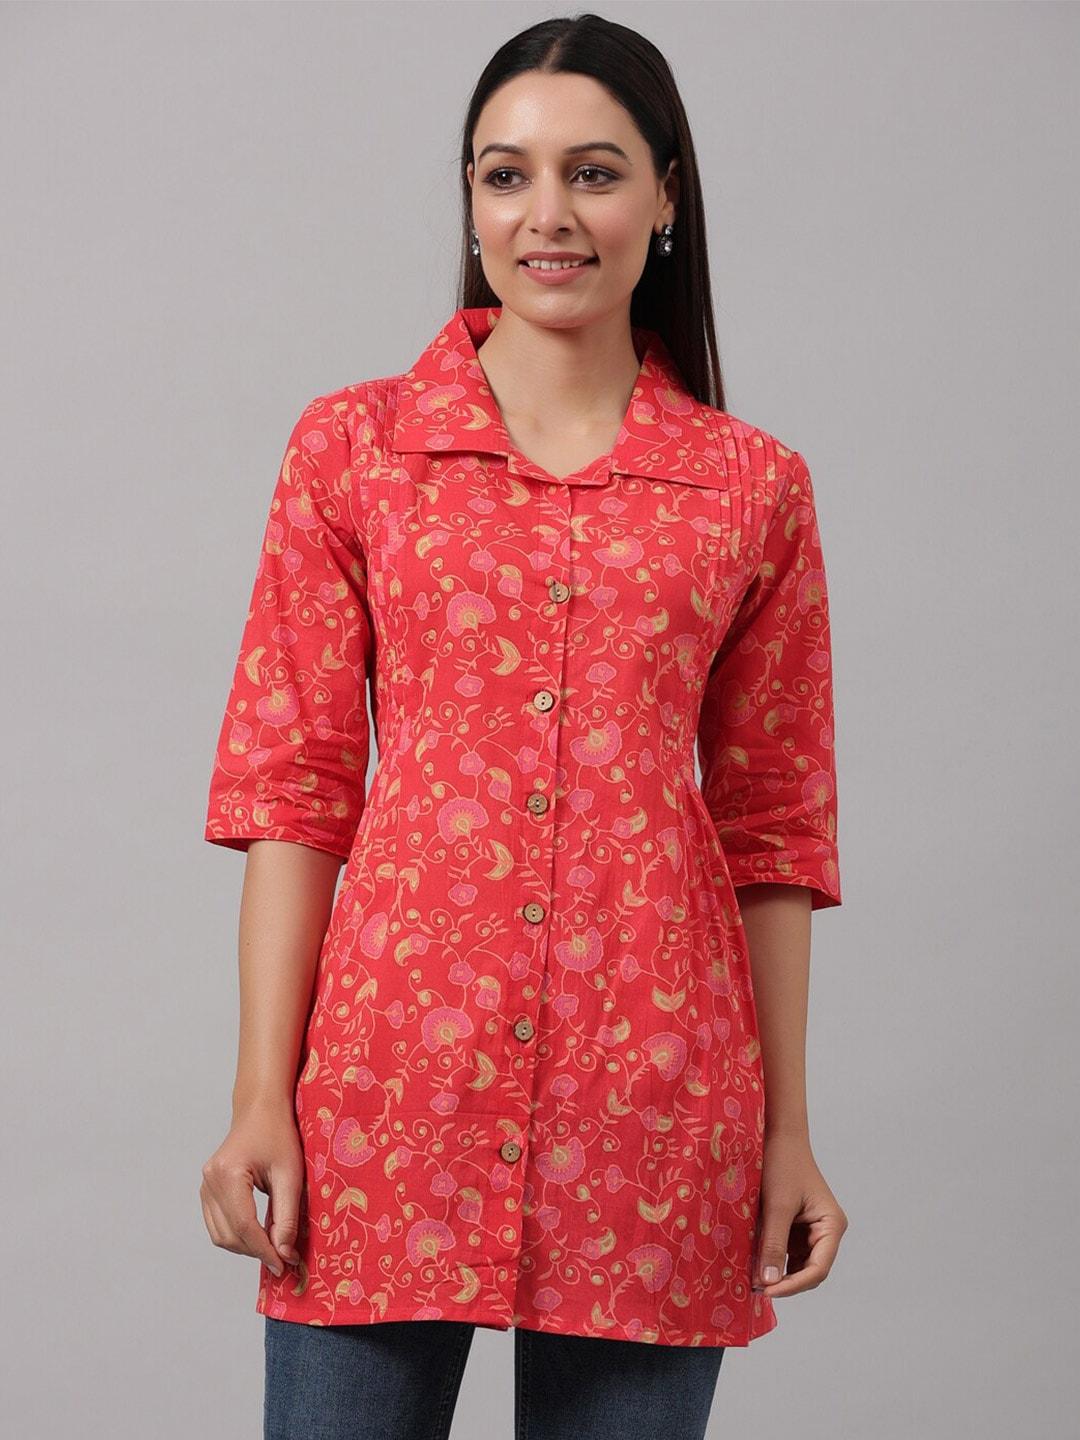 Do Dhaage Floral Print Shirt Style Longline Top